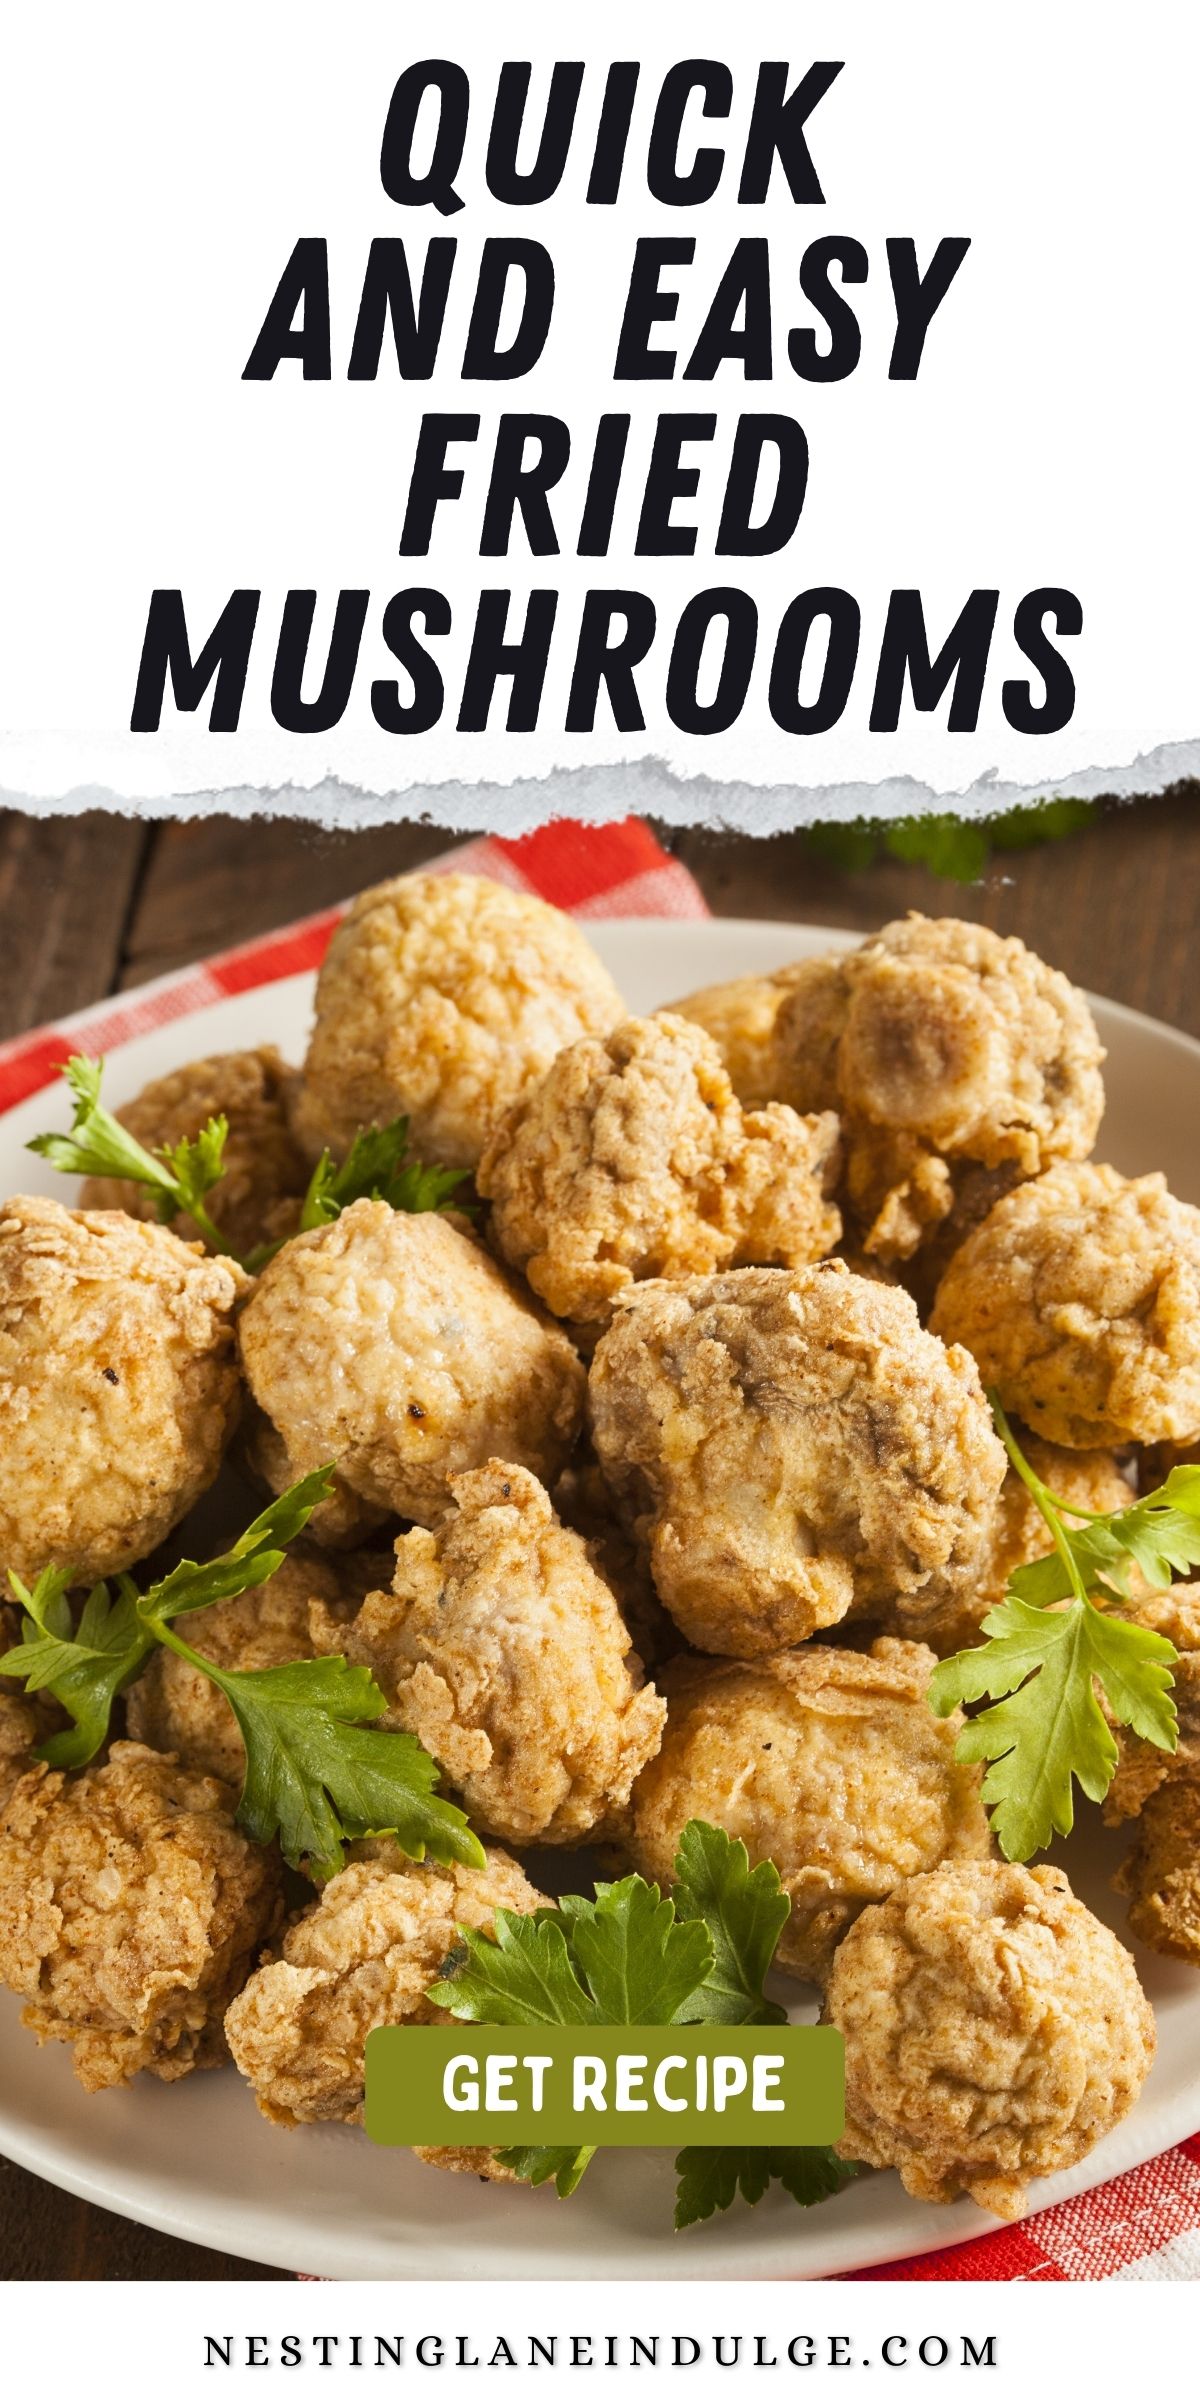 A vertical Pinterest-friendly image showcasing a plate of Quick and Easy Fried Mushrooms on a wooden table. The top half is text over a wooden background, with the name of the recipe in large, bold white font, and the website "nestinglaneindulge.com" in smaller font below. The bottom half displays a white plate with golden-brown, crispy fried mushrooms garnished with green parsley, next to a small bowl of dipping sauce, all atop a red and white checkered napkin.